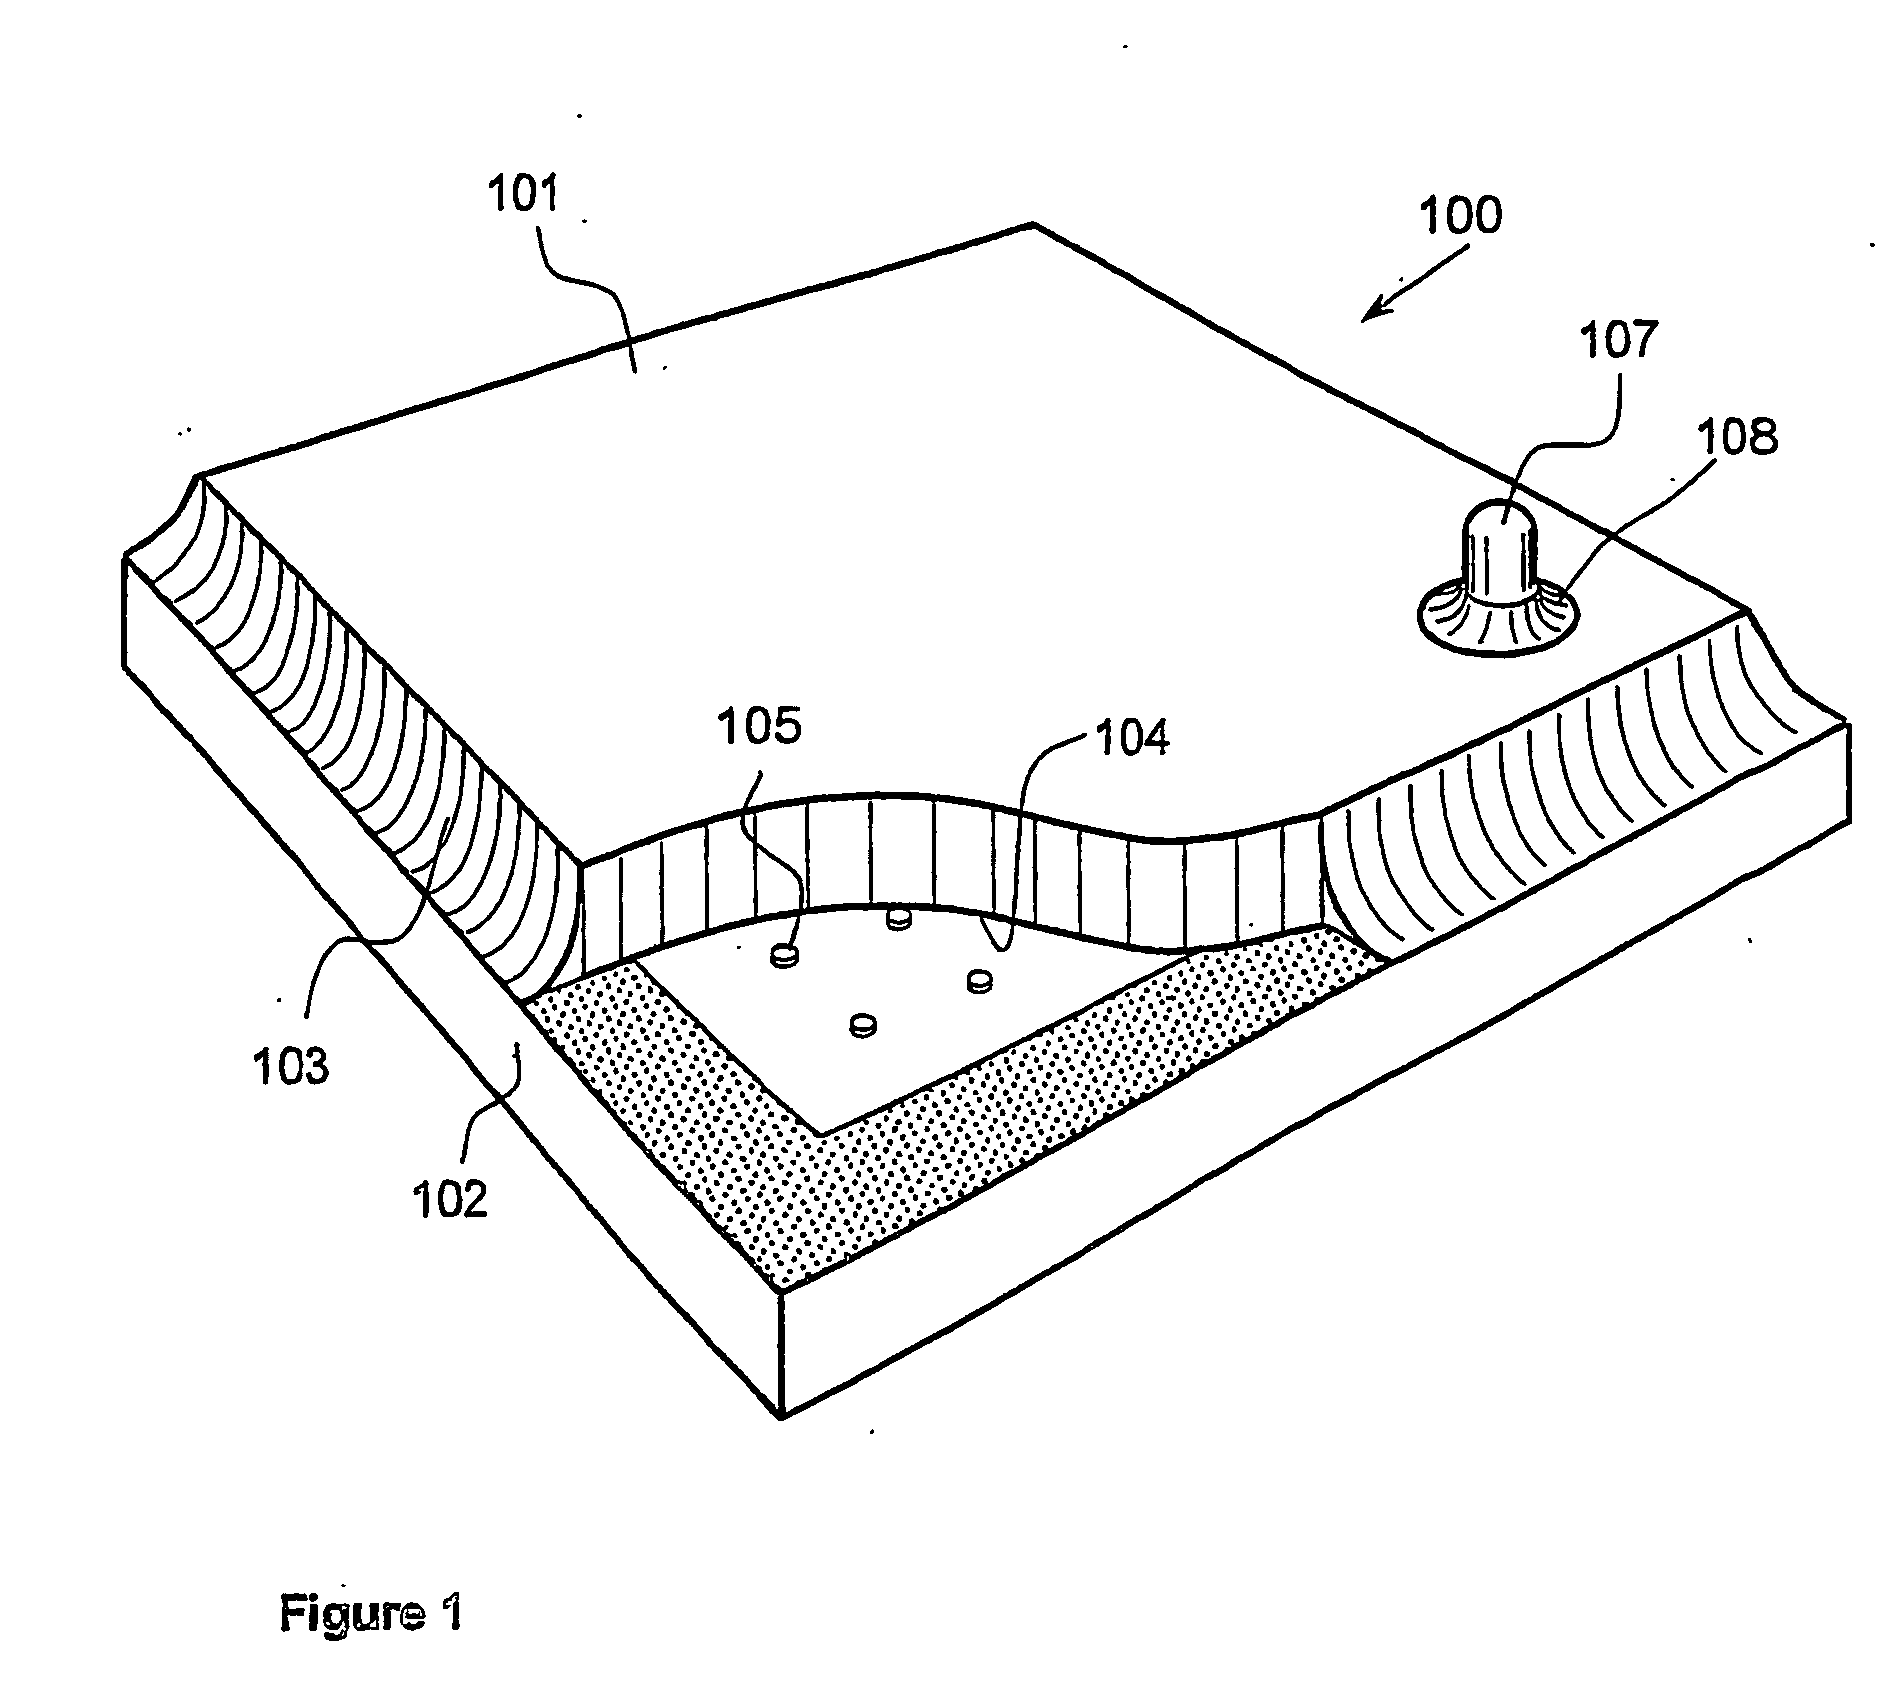 Sealing arrangement for use in evacuating a glass chamber